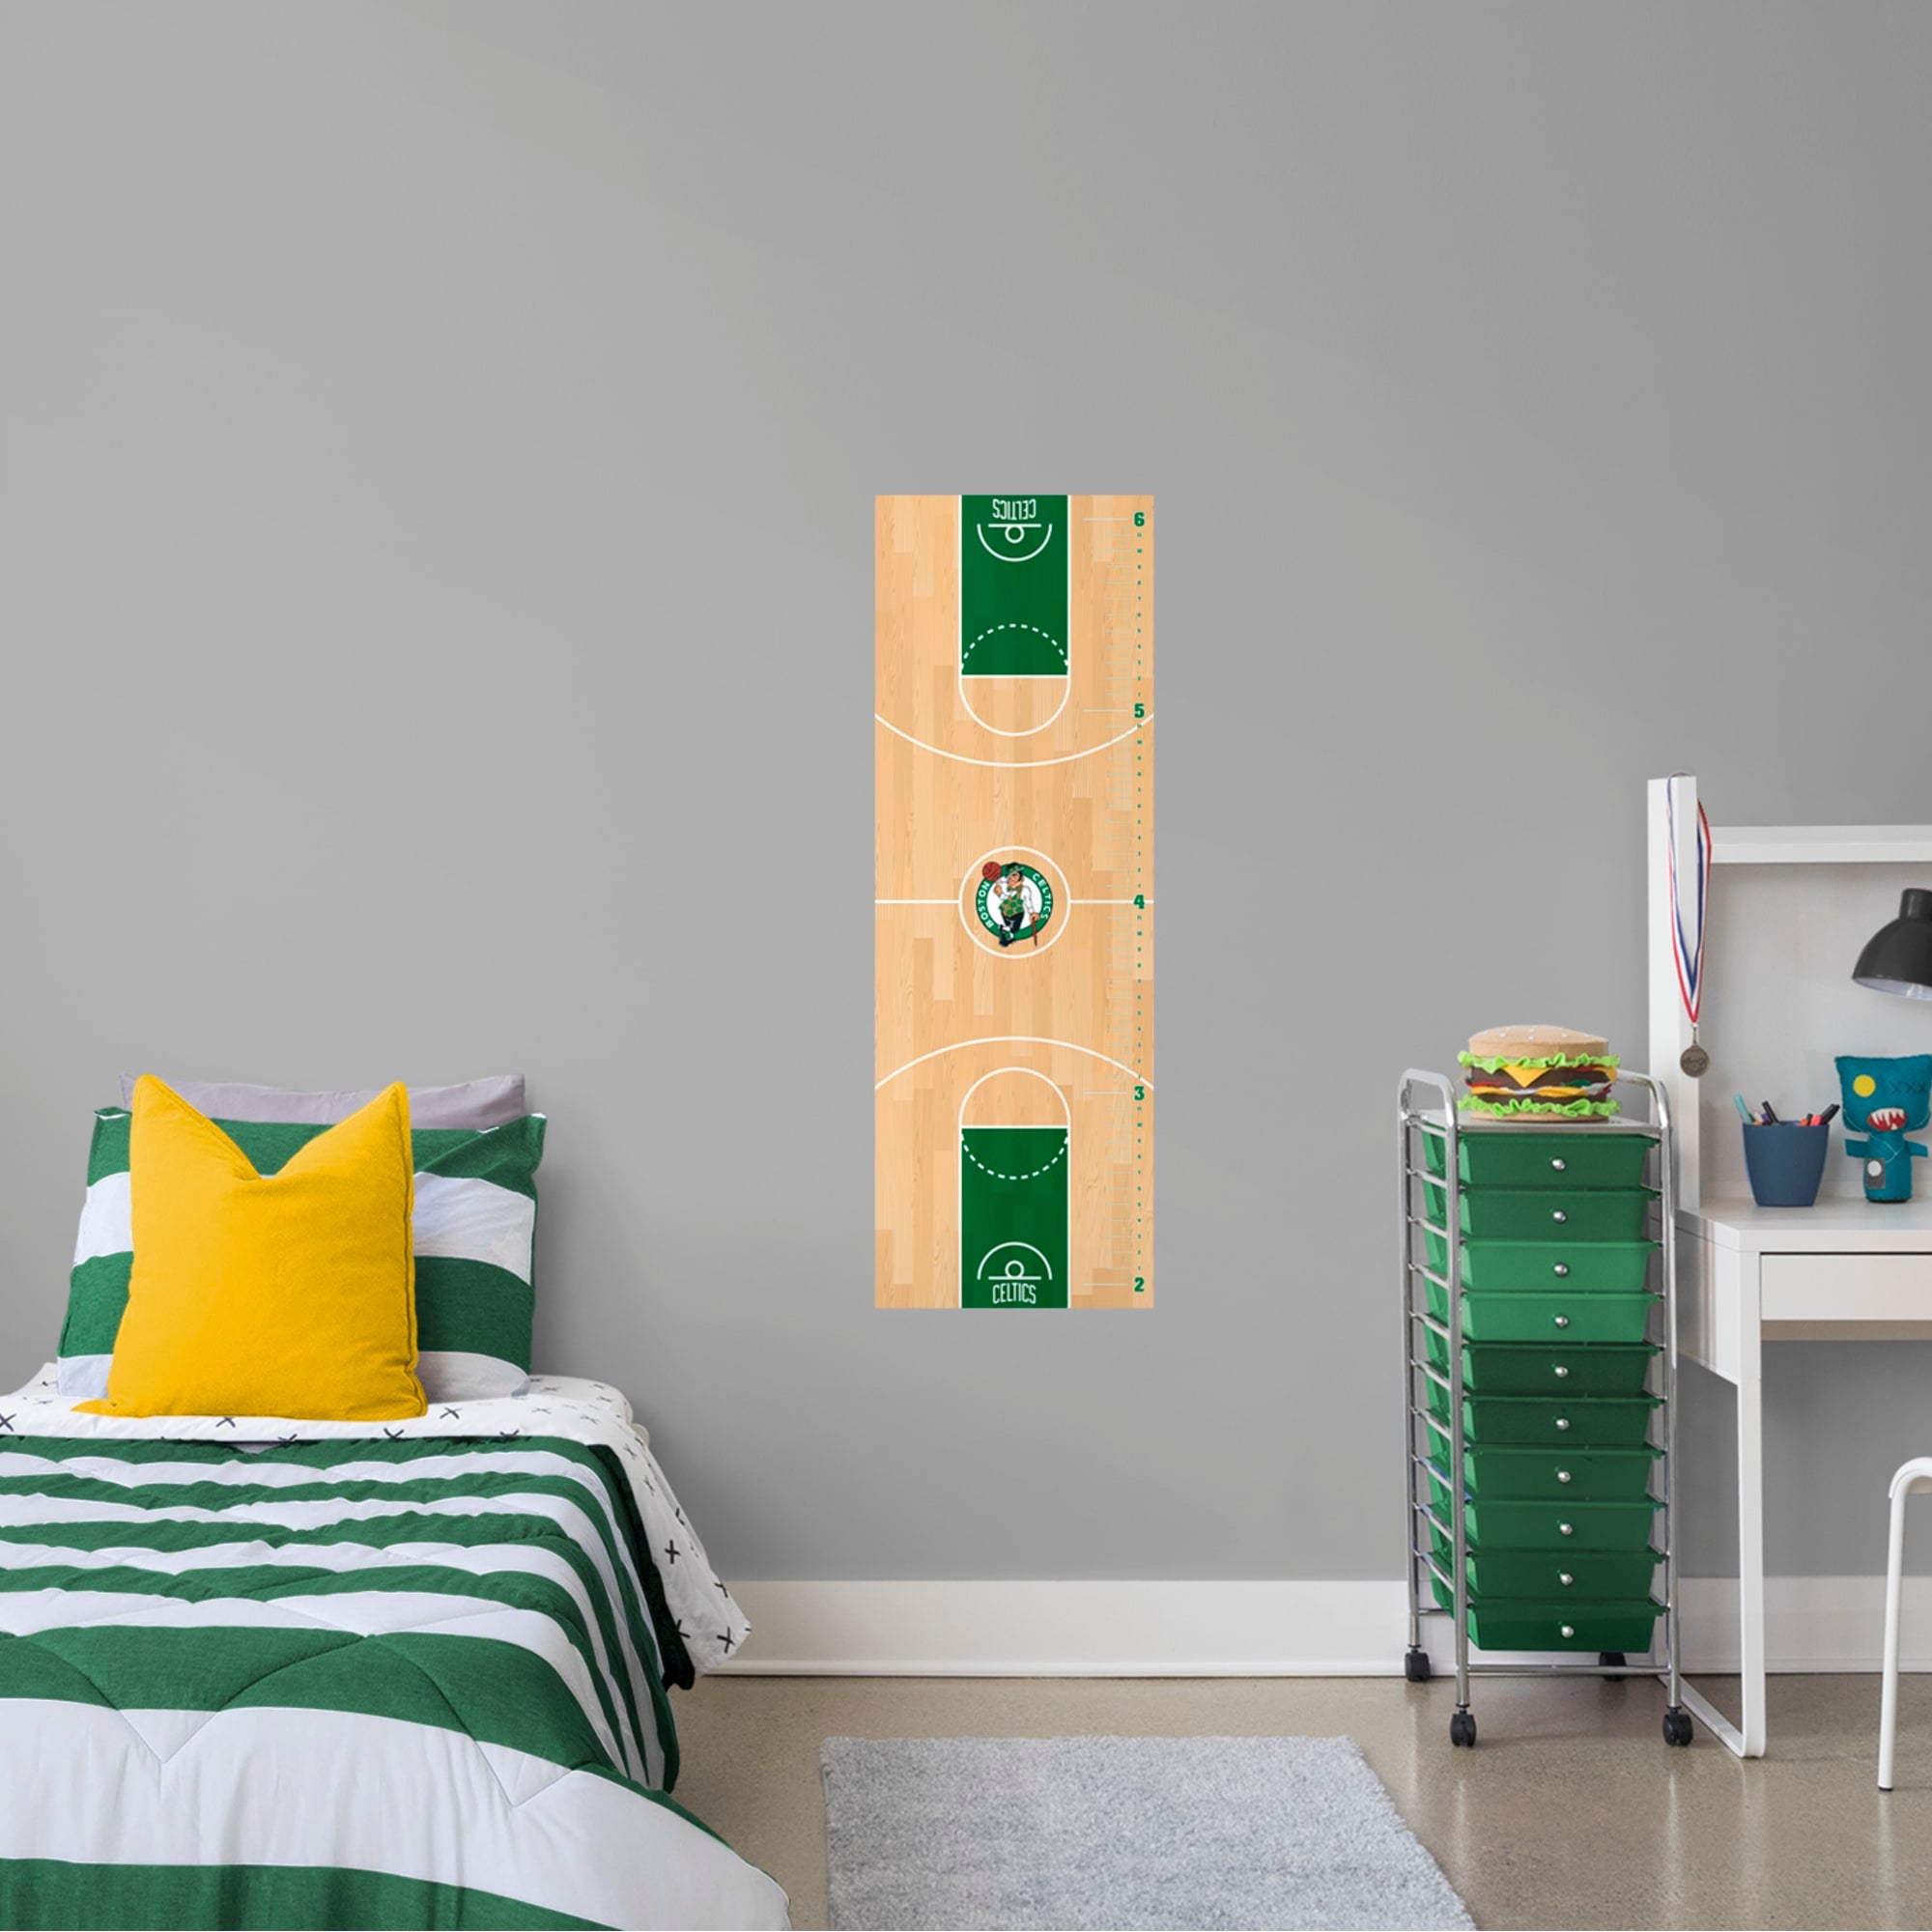 Boston Celtics: Growth Chart - Officially Licensed NBA Removable Wall Decal 17.5"W x 51.0"H by Fathead | Vinyl